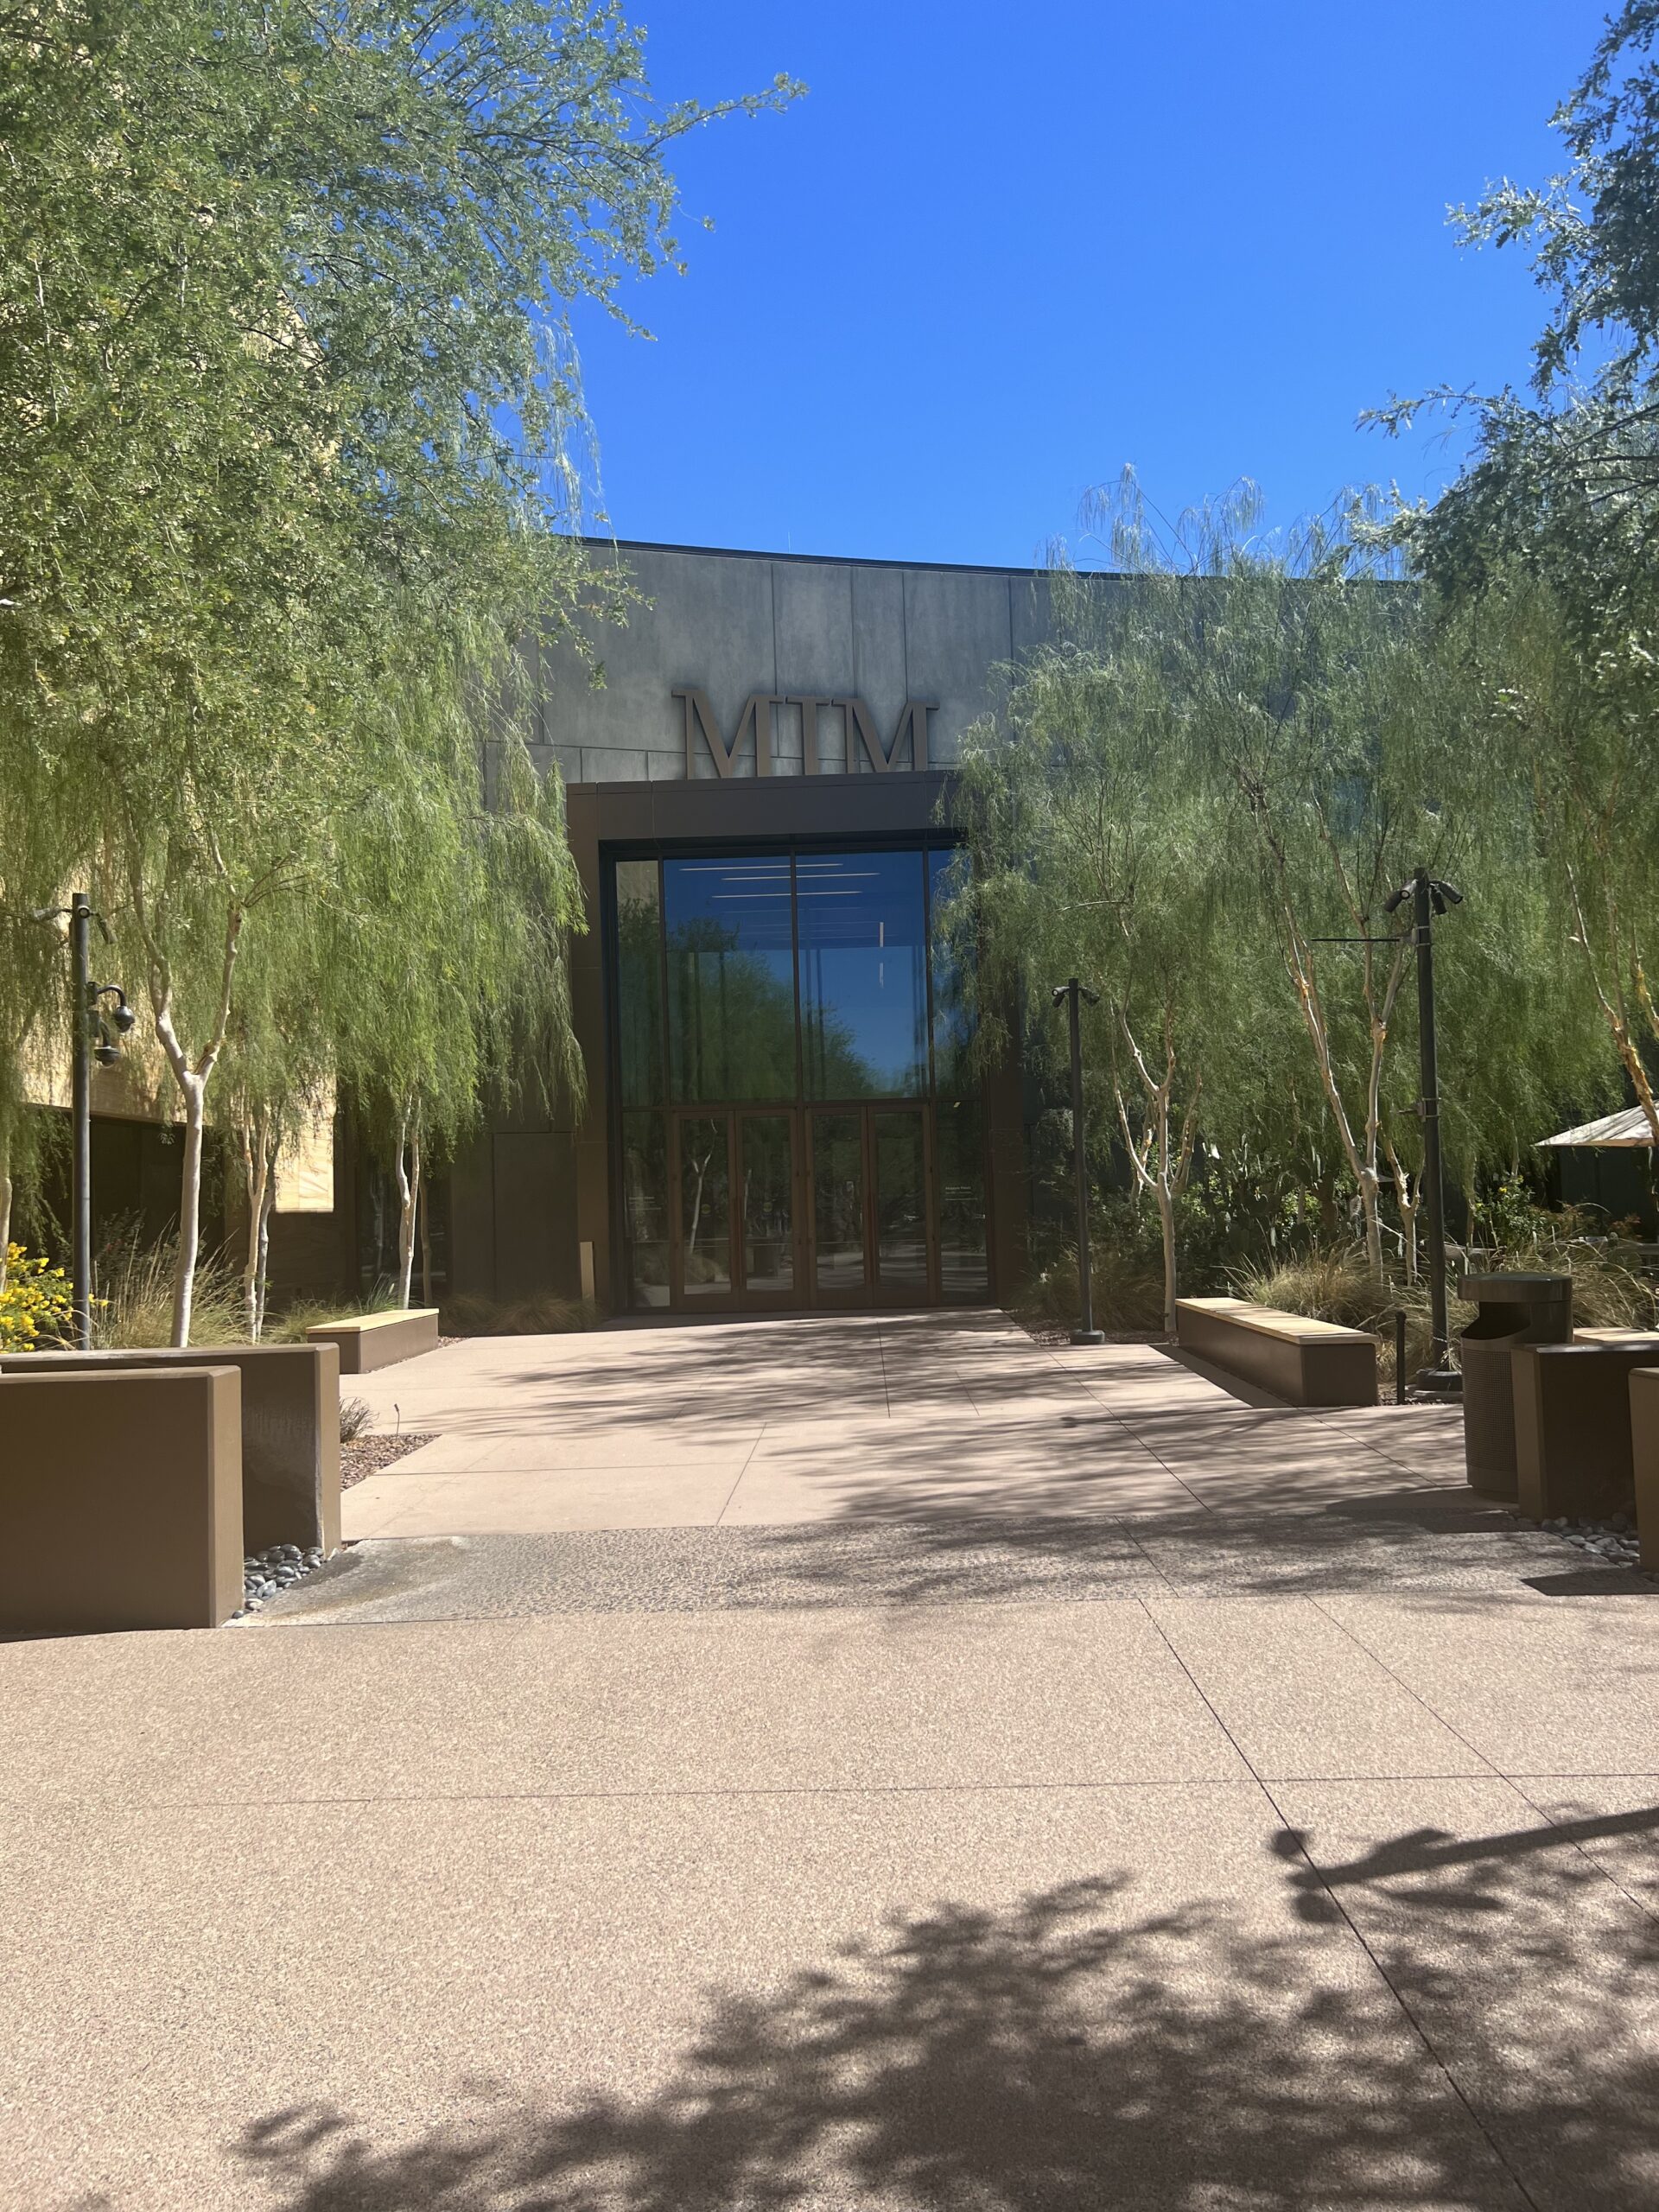 The Ultimate Guide to Visiting the Musical Instrument Museum in Phoenix